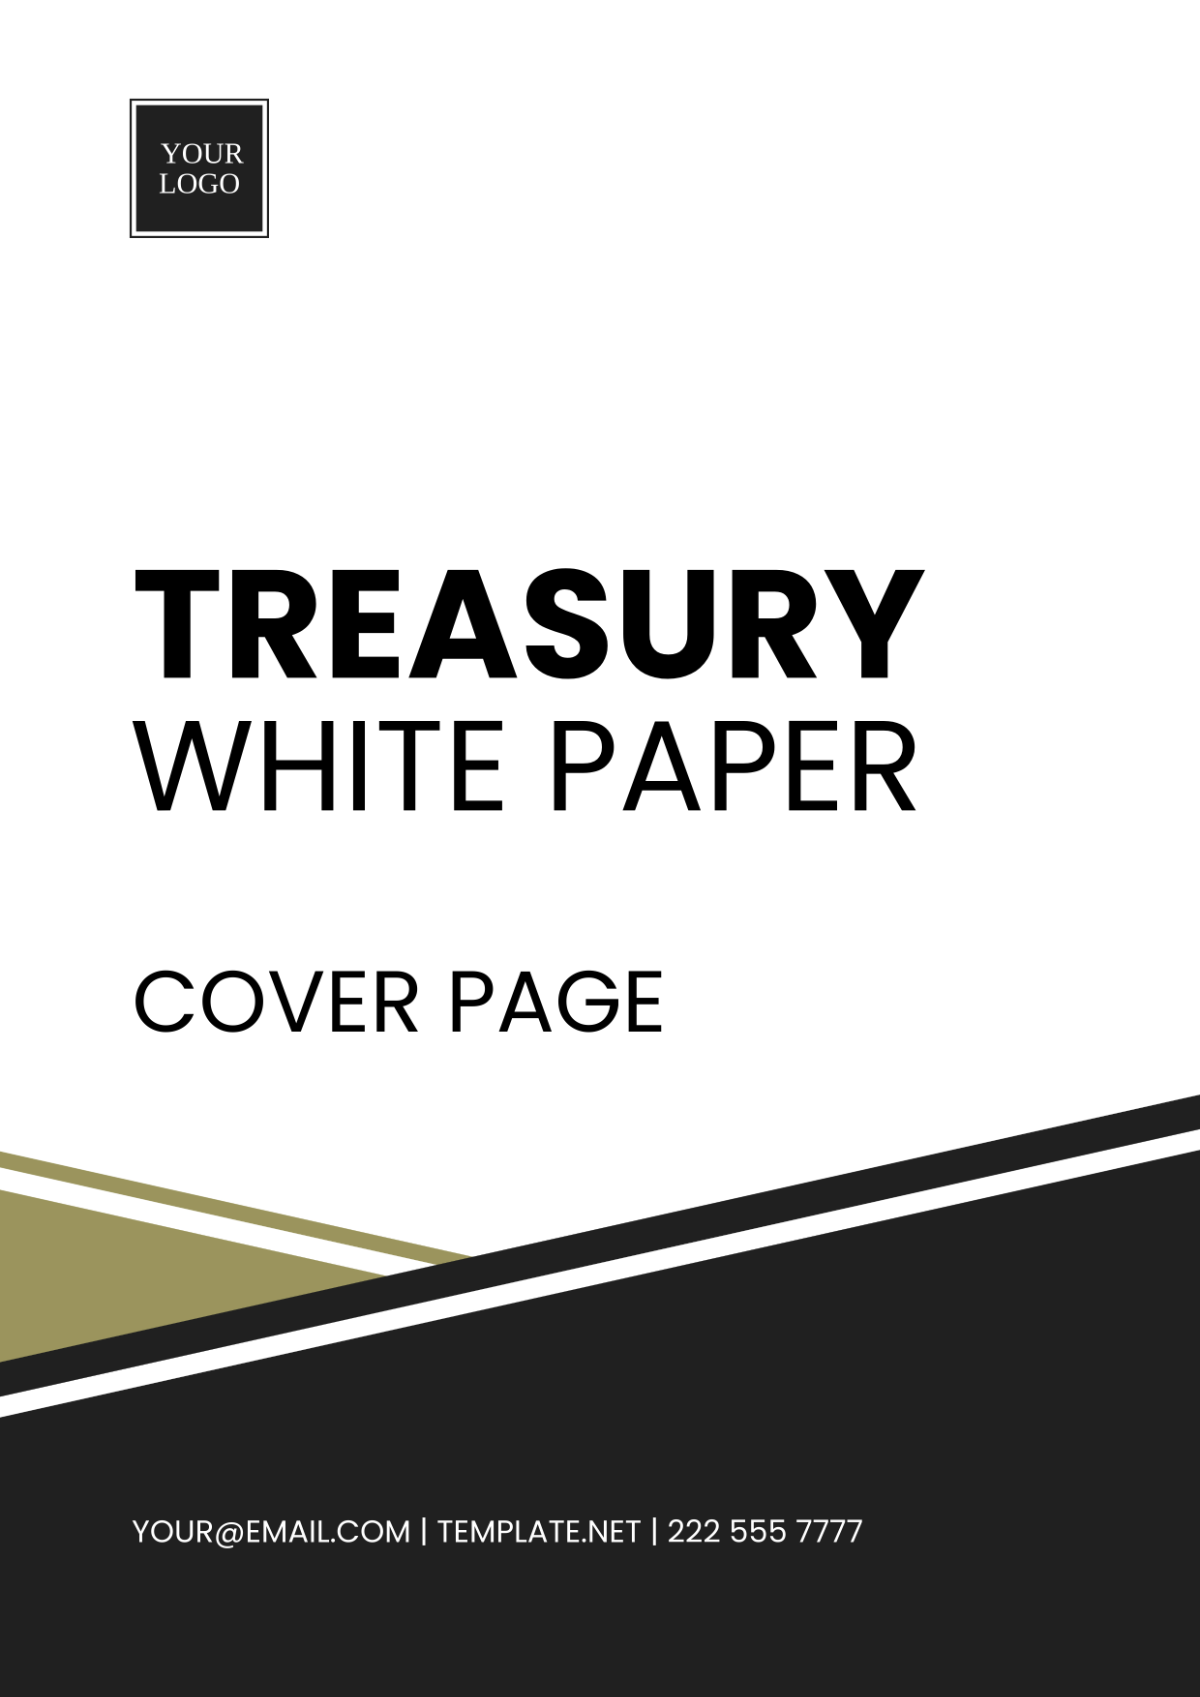 Treasury White Paper Cover Page Template